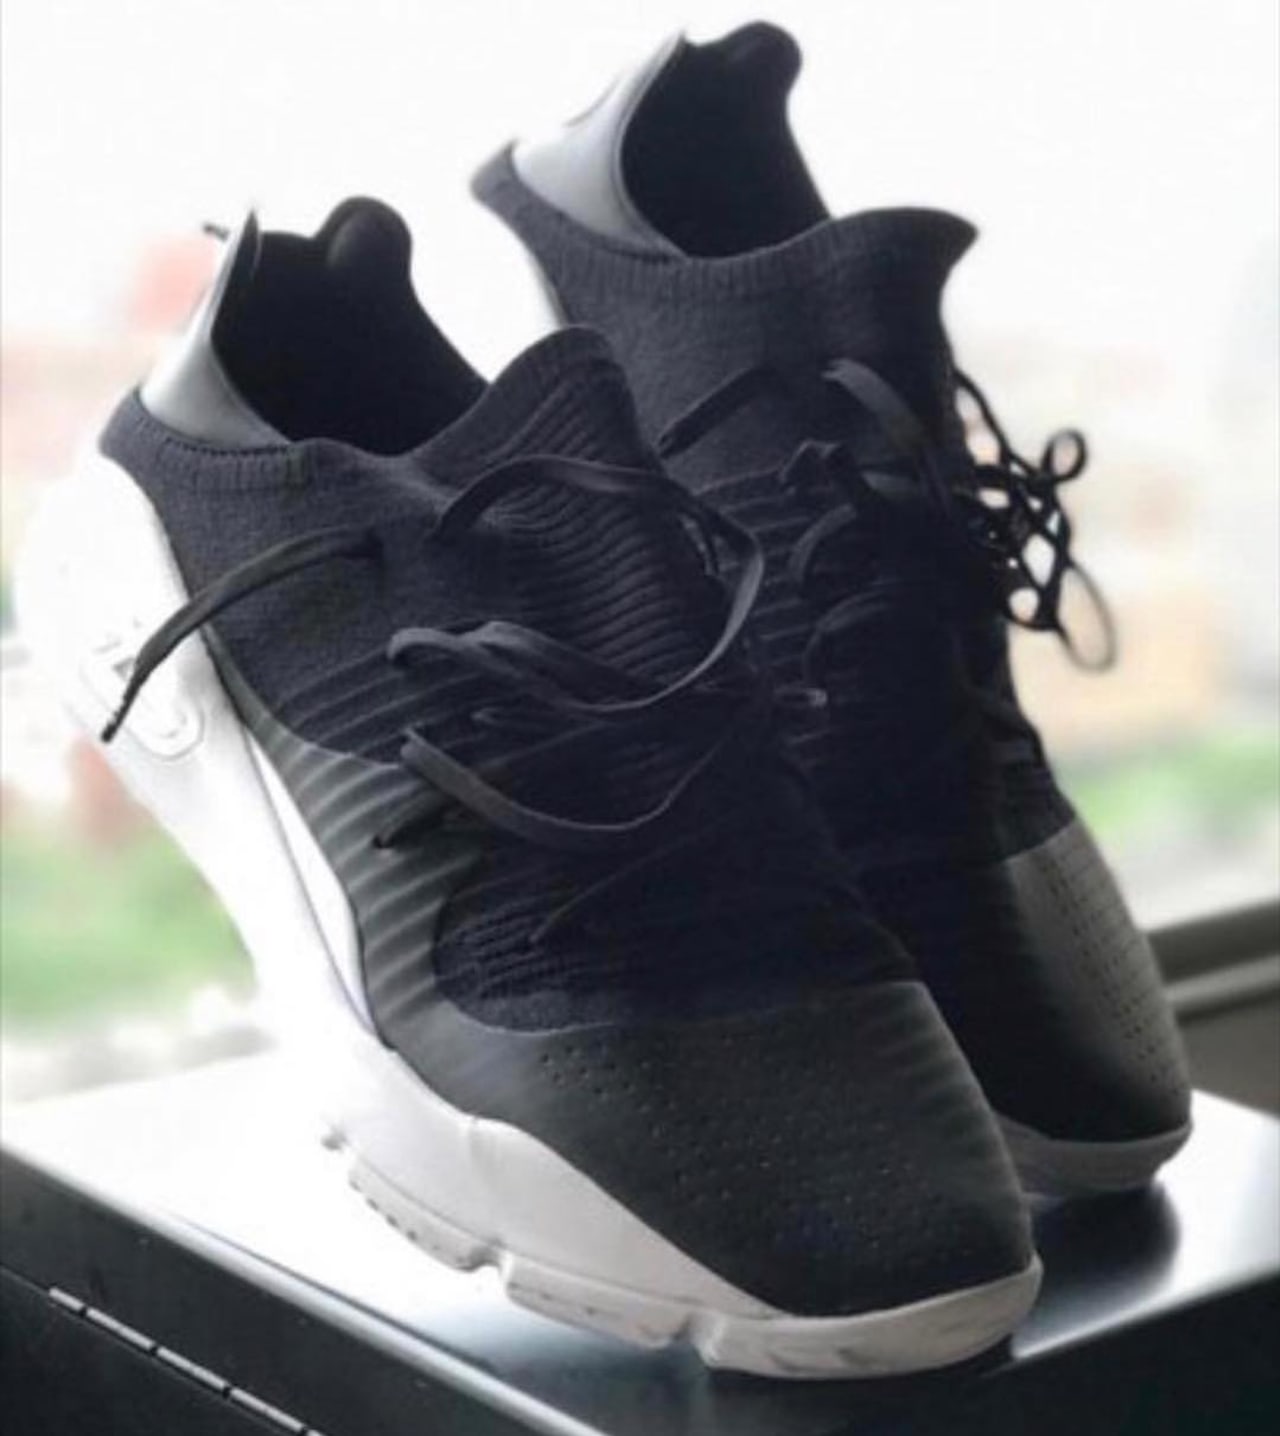 curry 4 low oreo